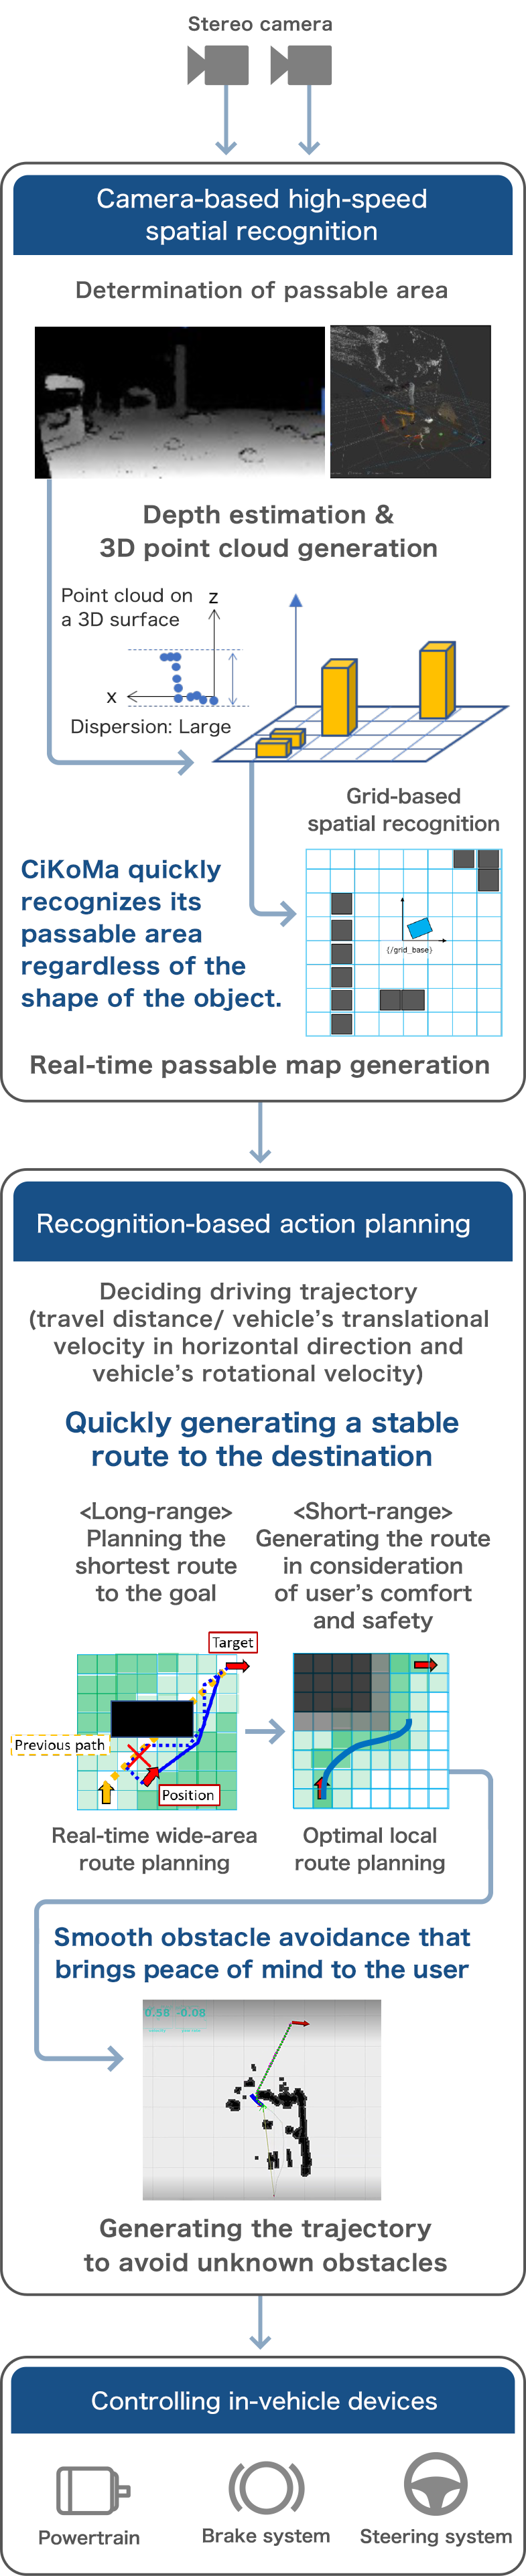 Flow of control for the map-less cooperative driving on the roadway